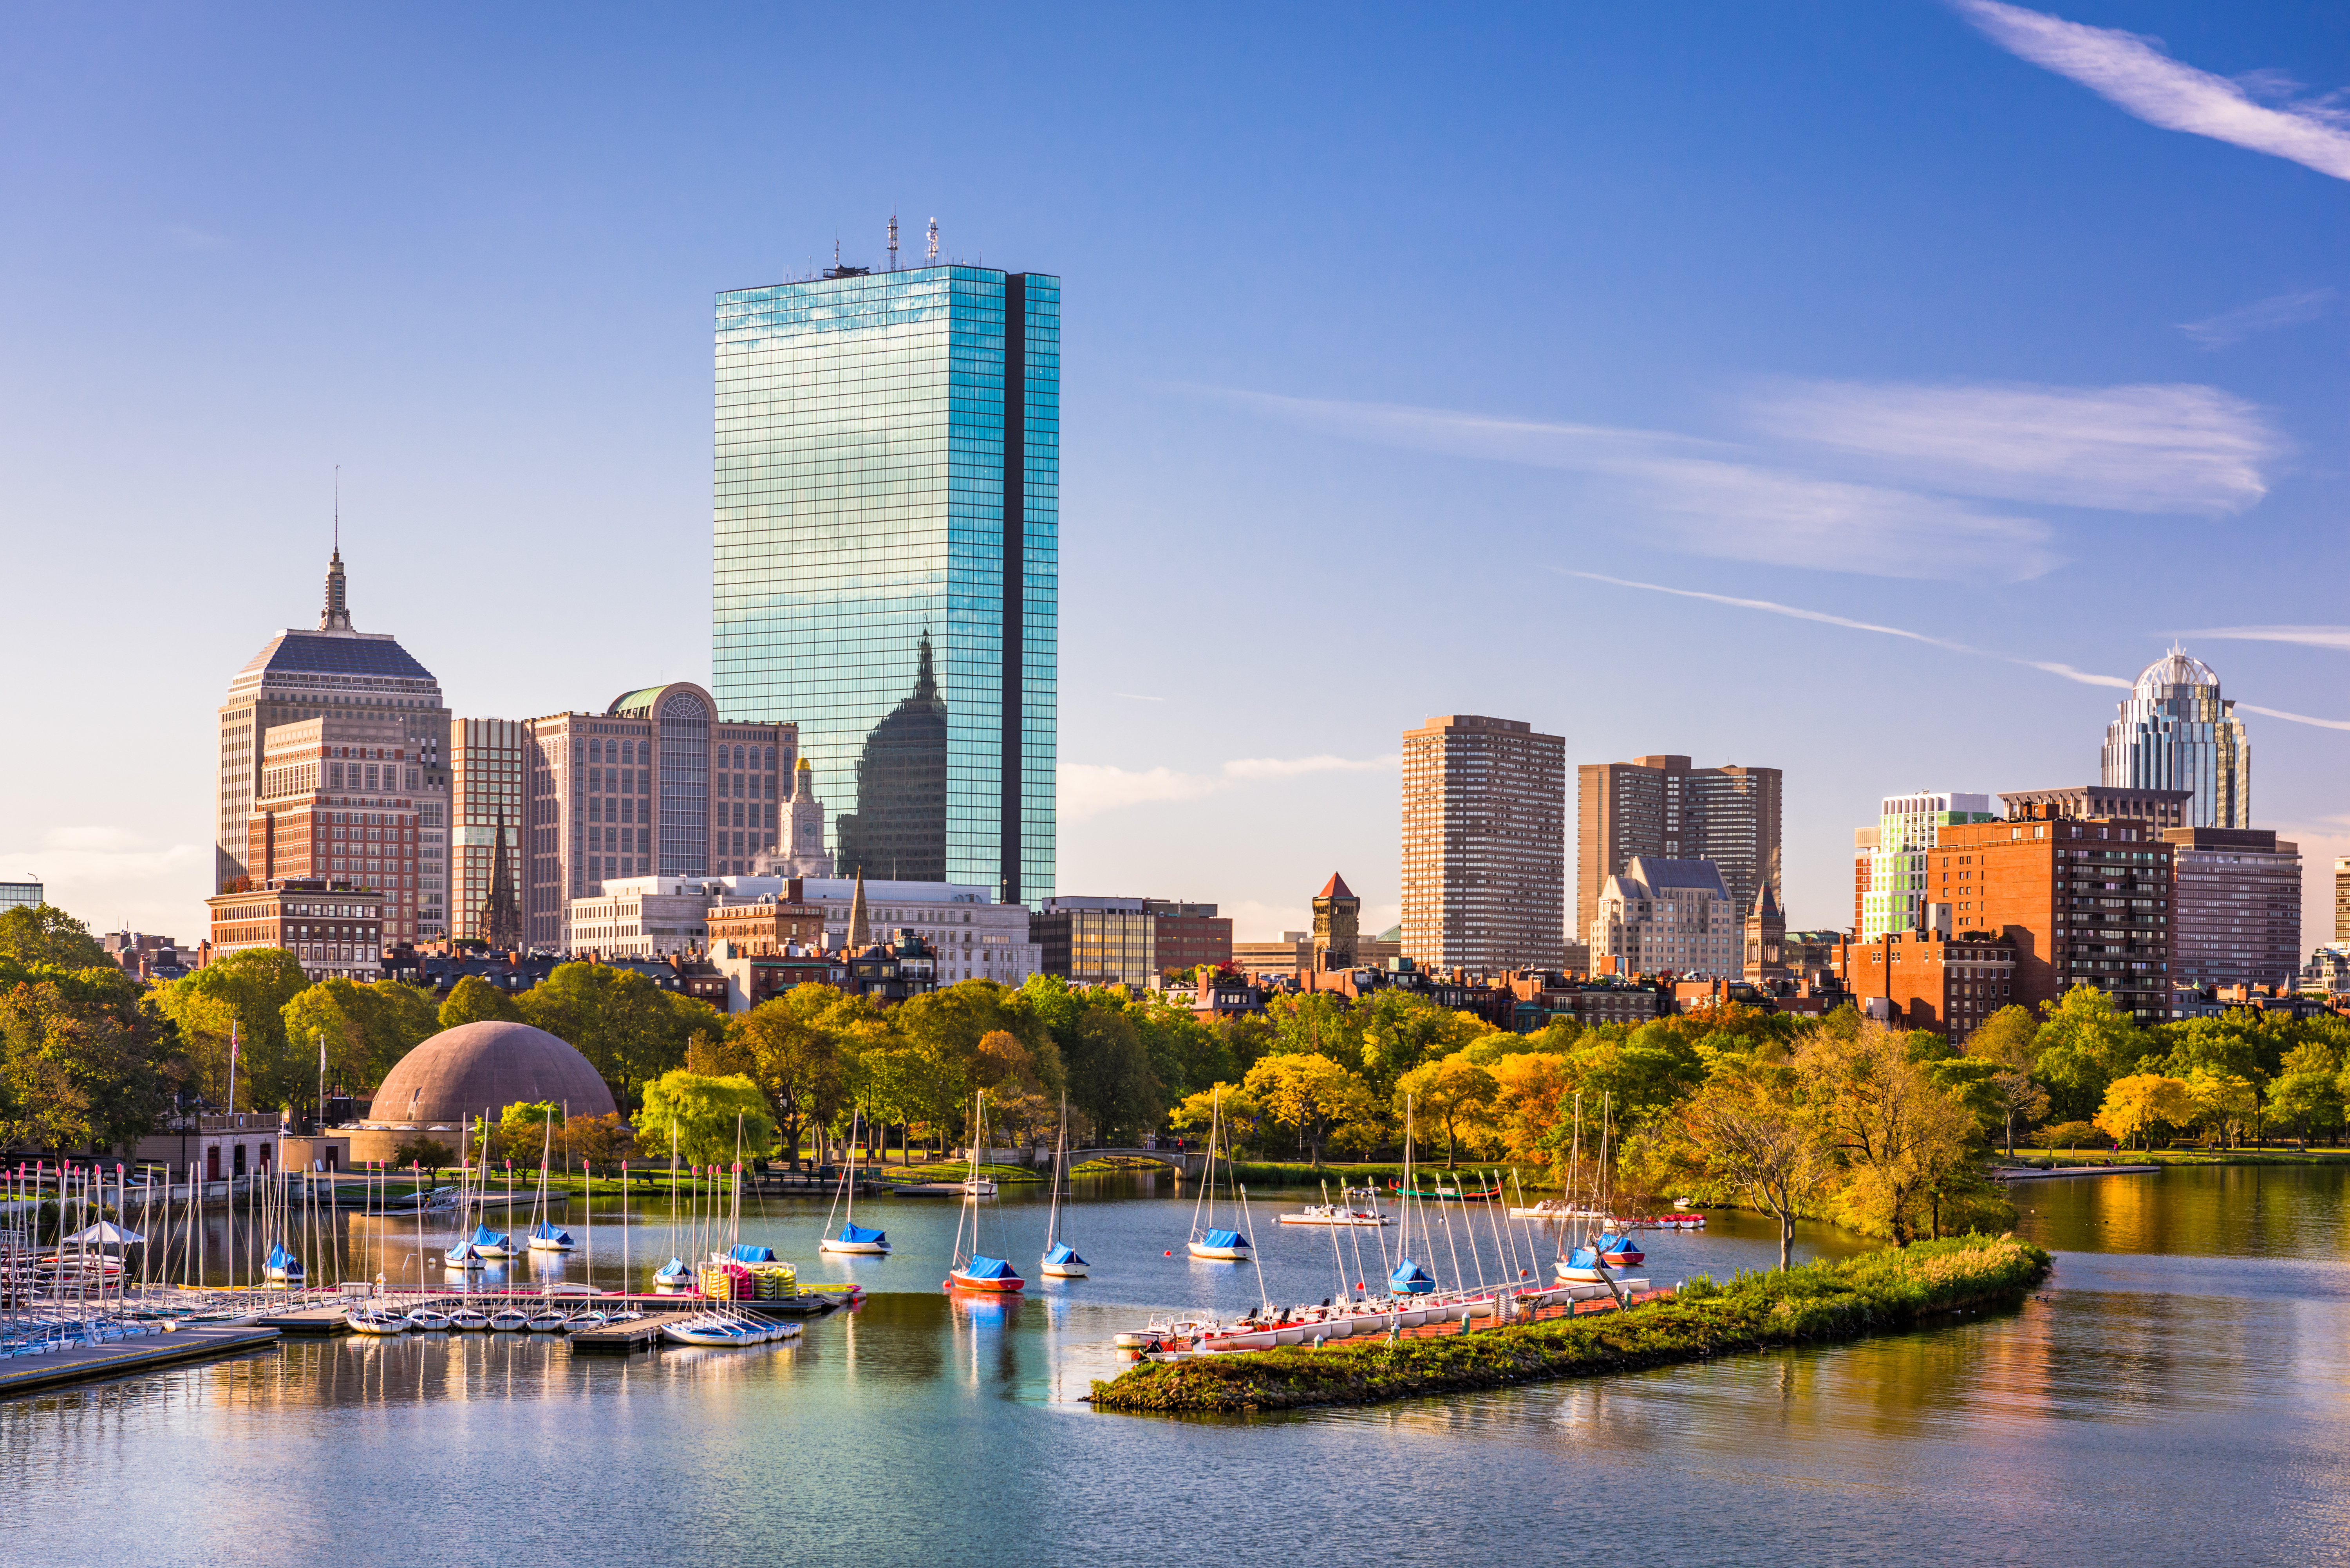 Cruise the Charles River